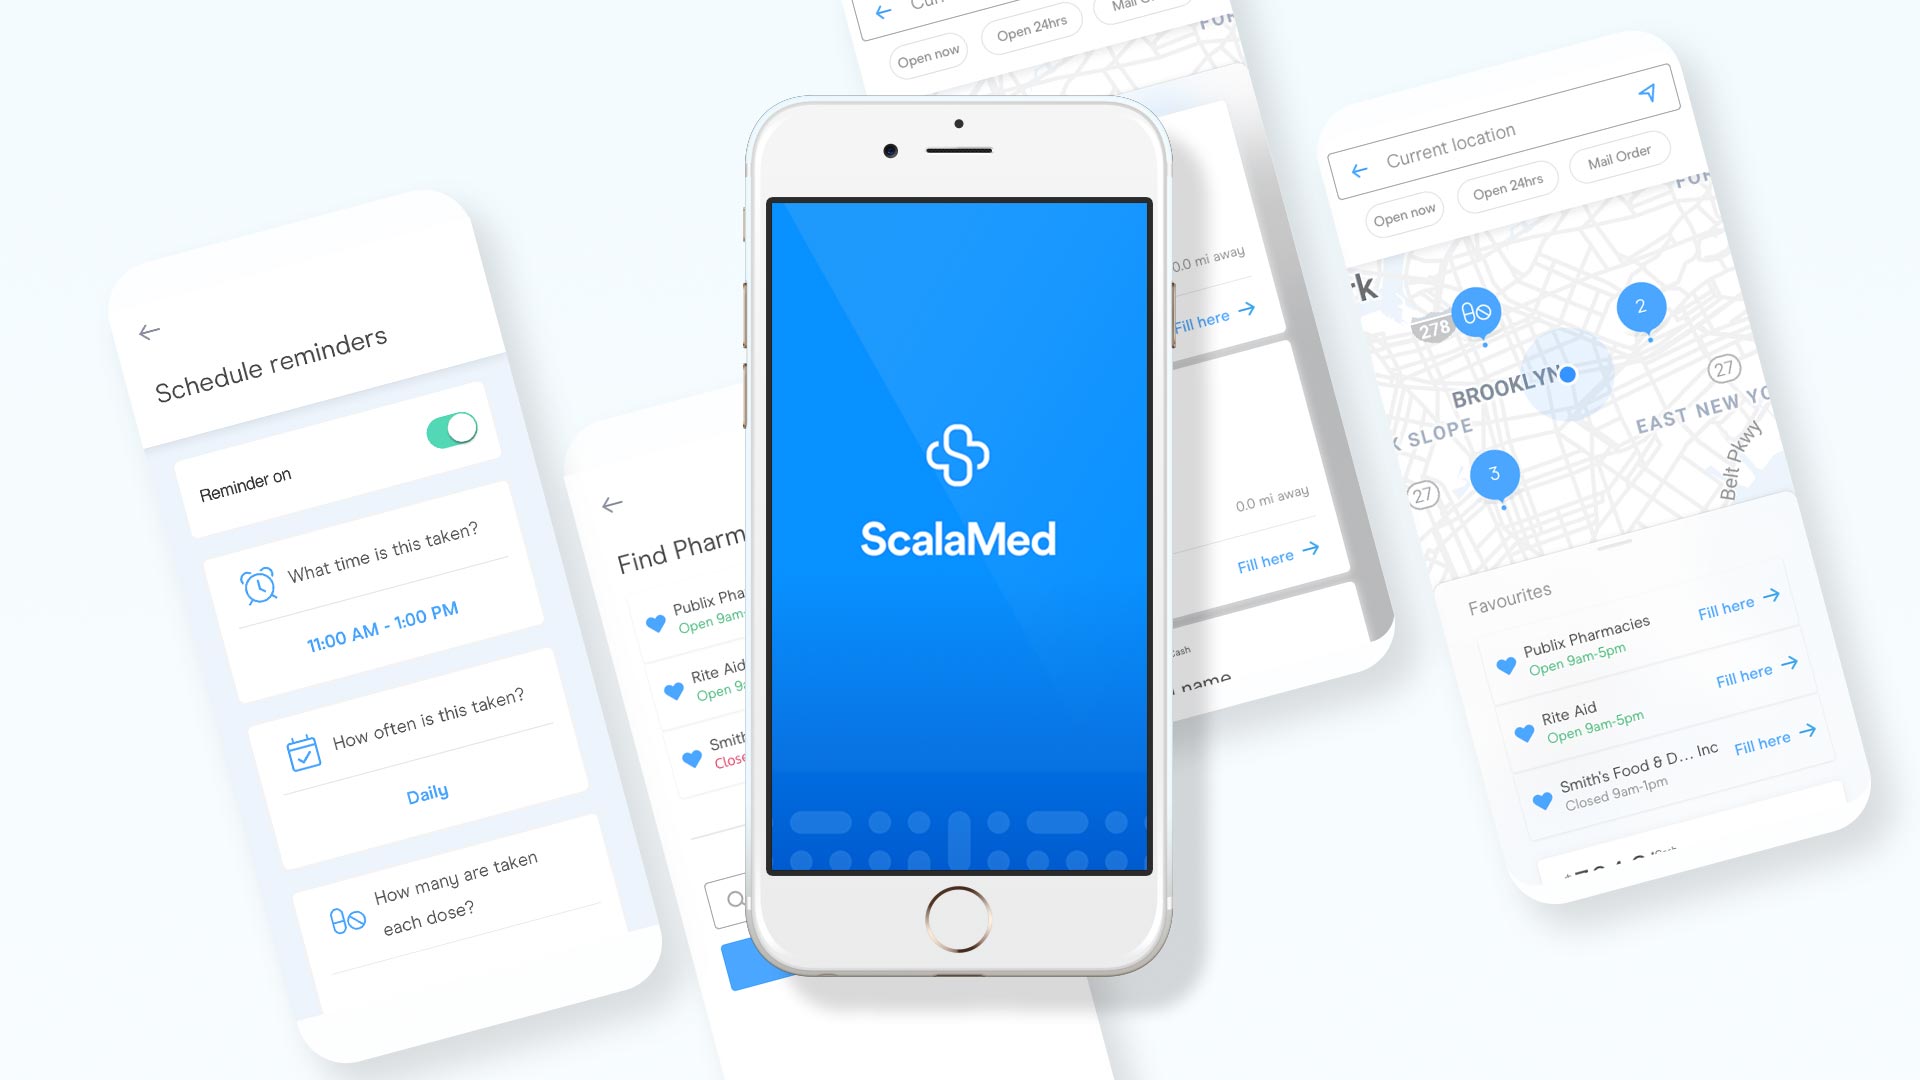 User Interface screens of Scalamed App